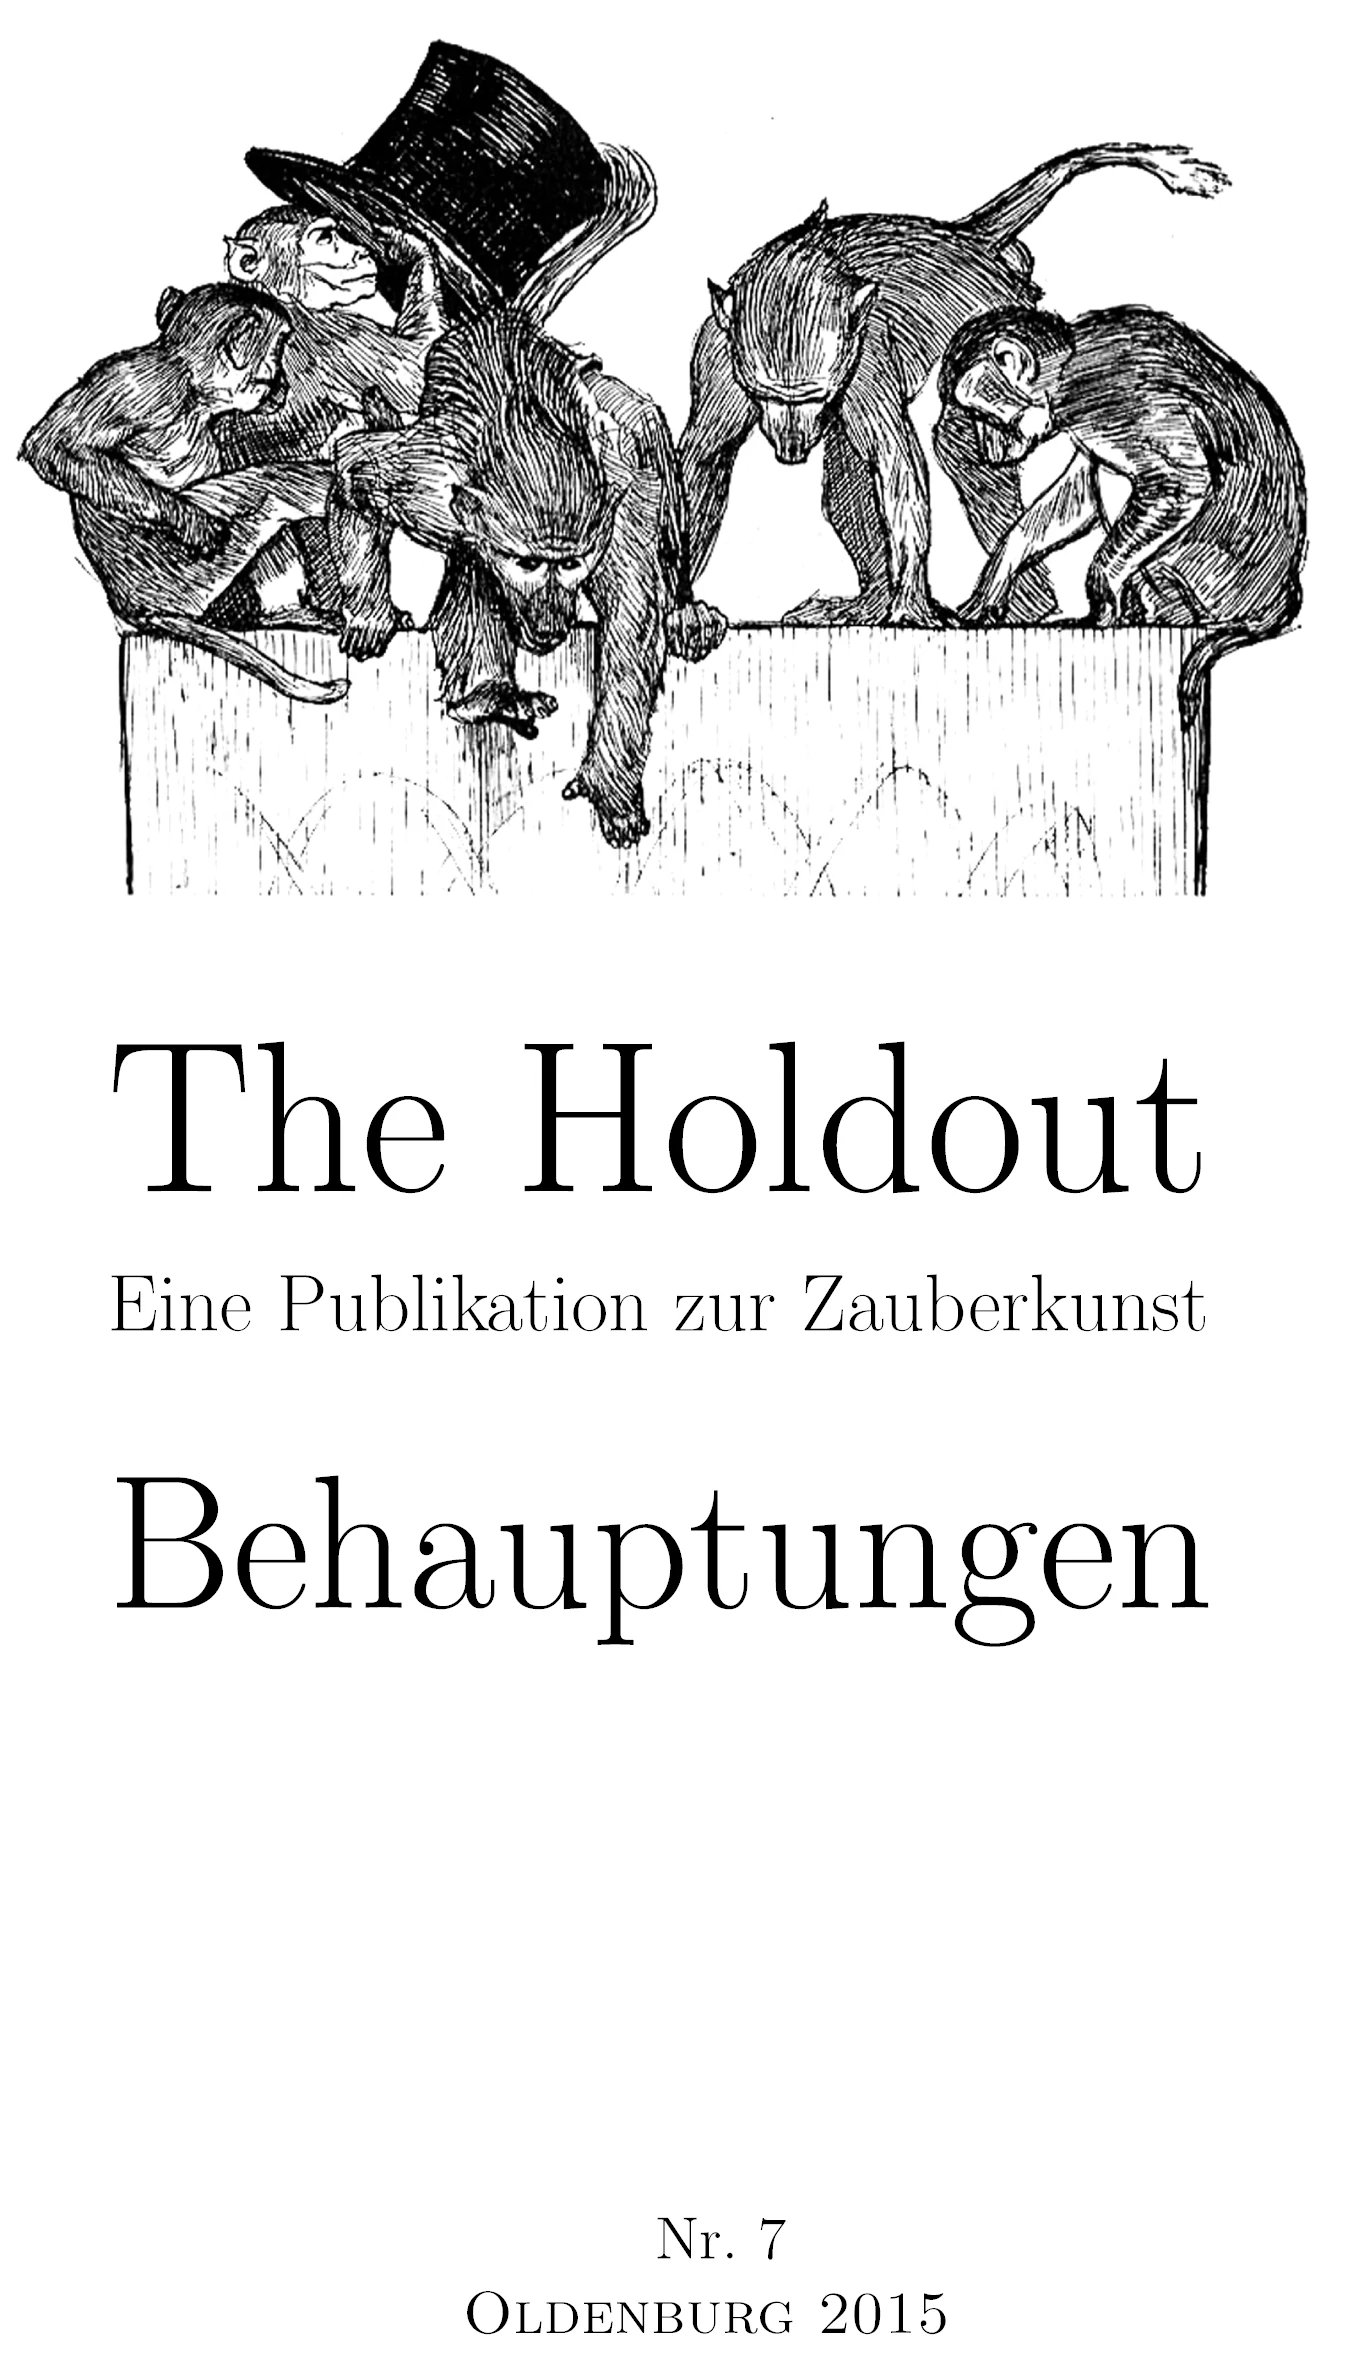 The Holdout Nr. 7